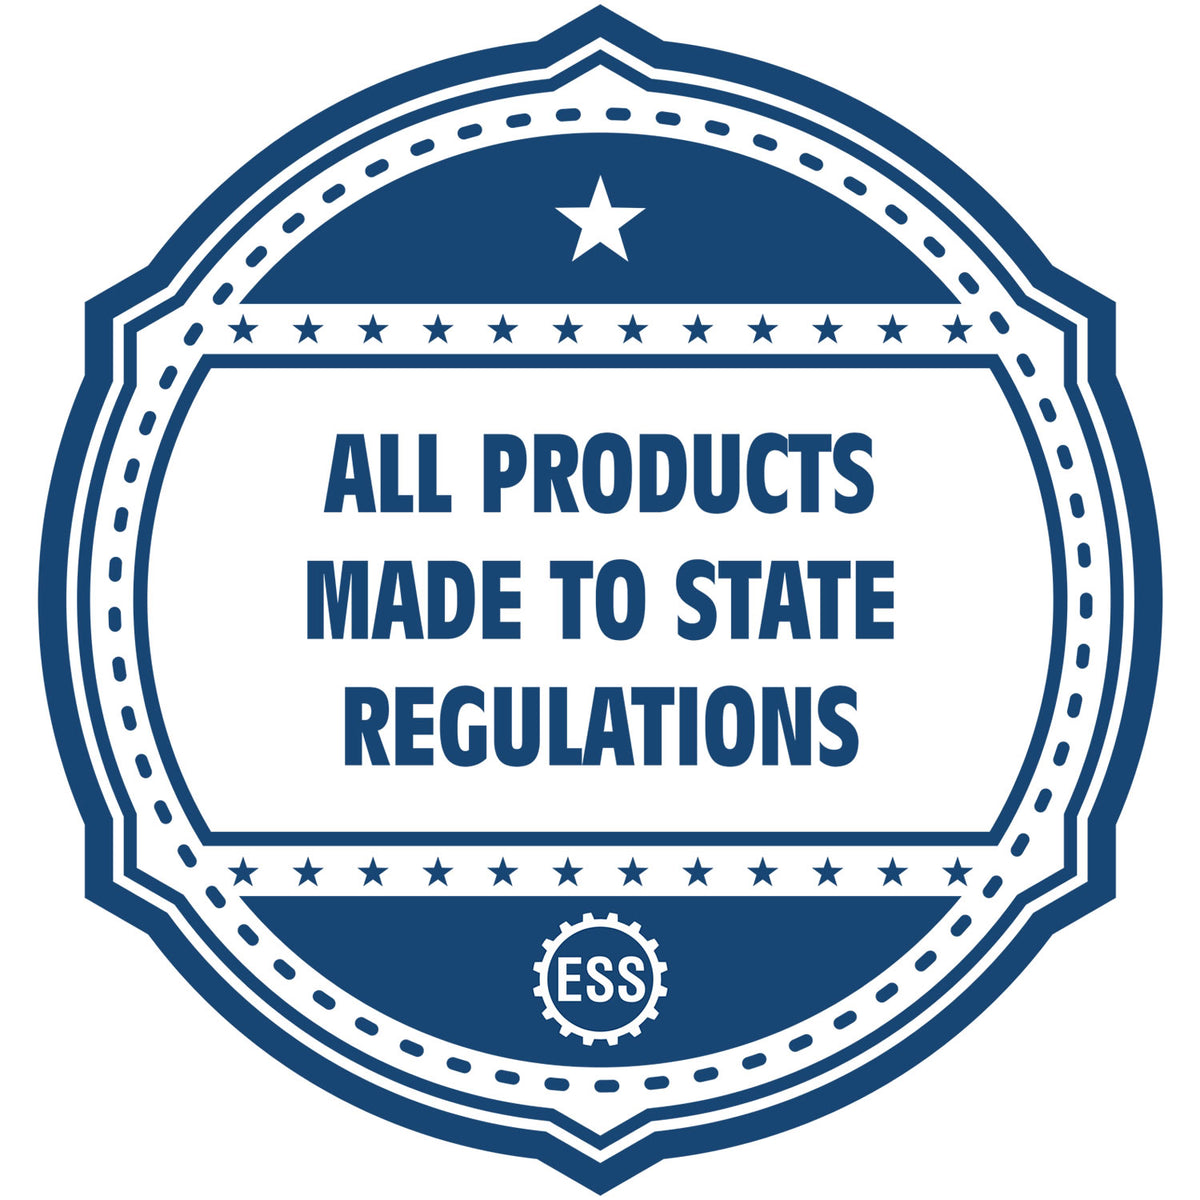 An icon or badge element for the New Hampshire Landscape Architectural Seal Stamp showing that this product is made in compliance with state regulations.